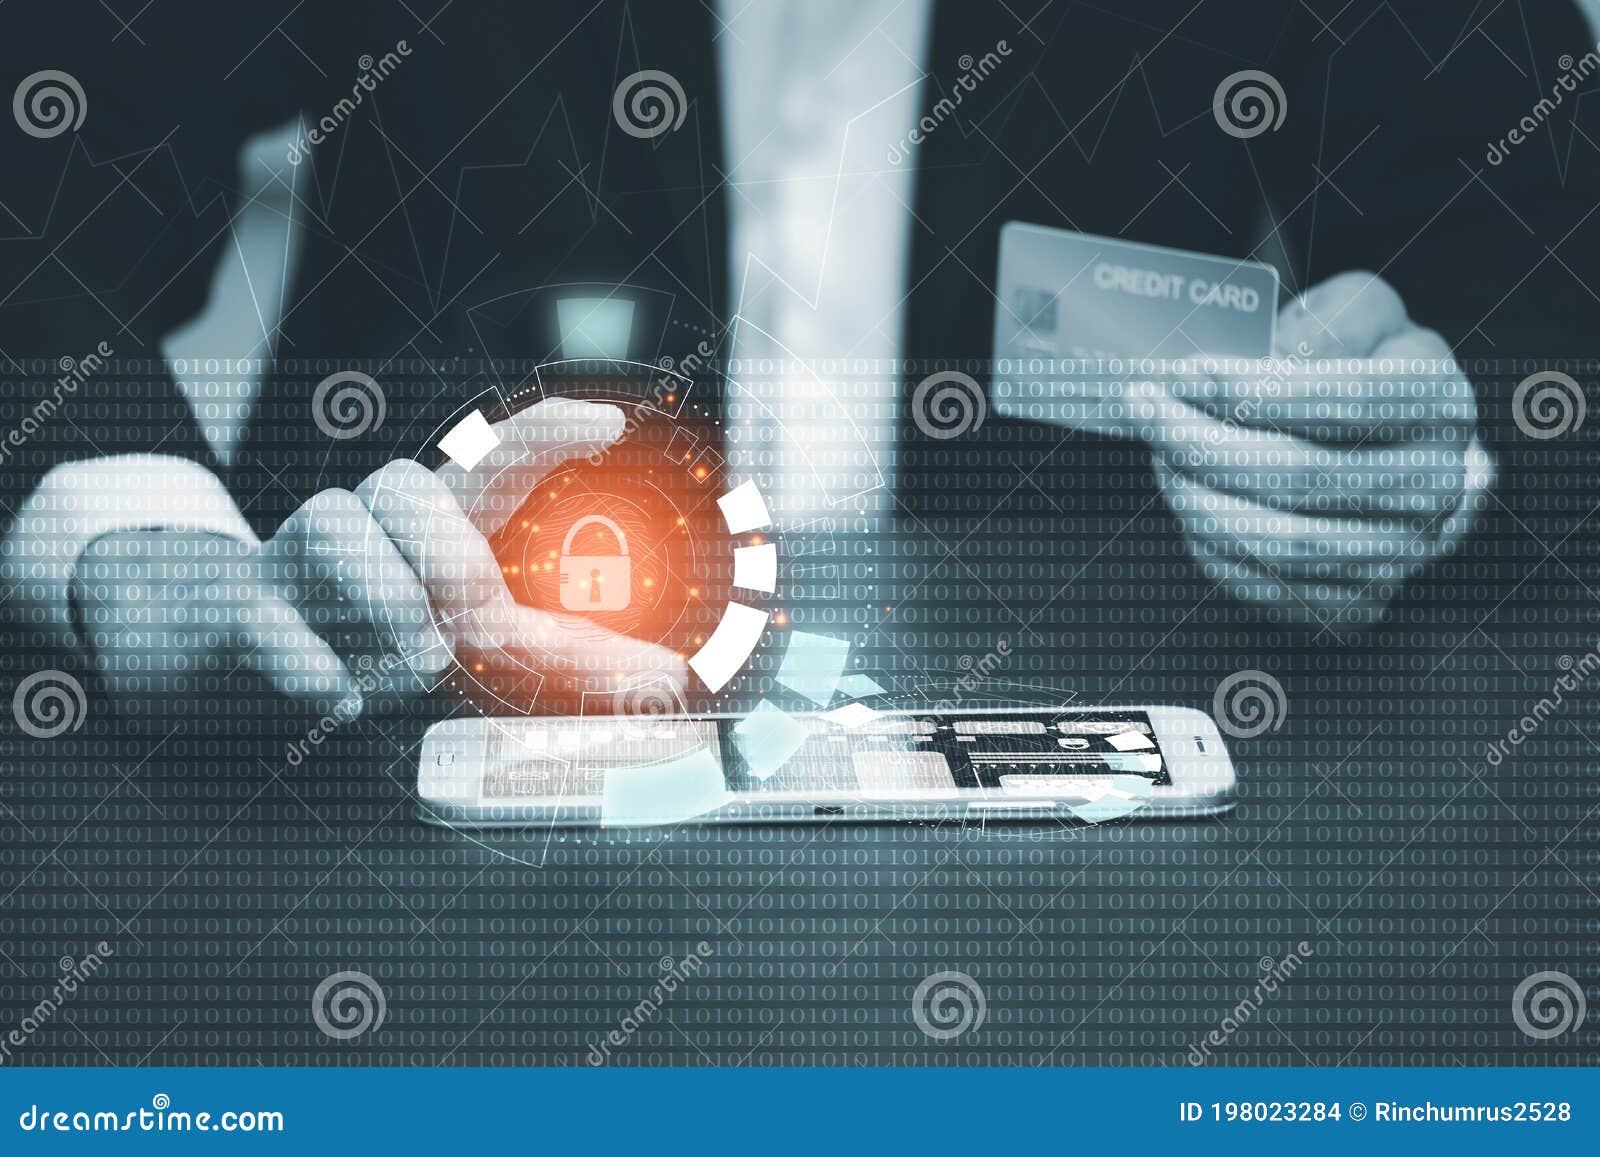 787 Card Credit Hack Photos Free Royalty Free Stock Photos From Dreamstime